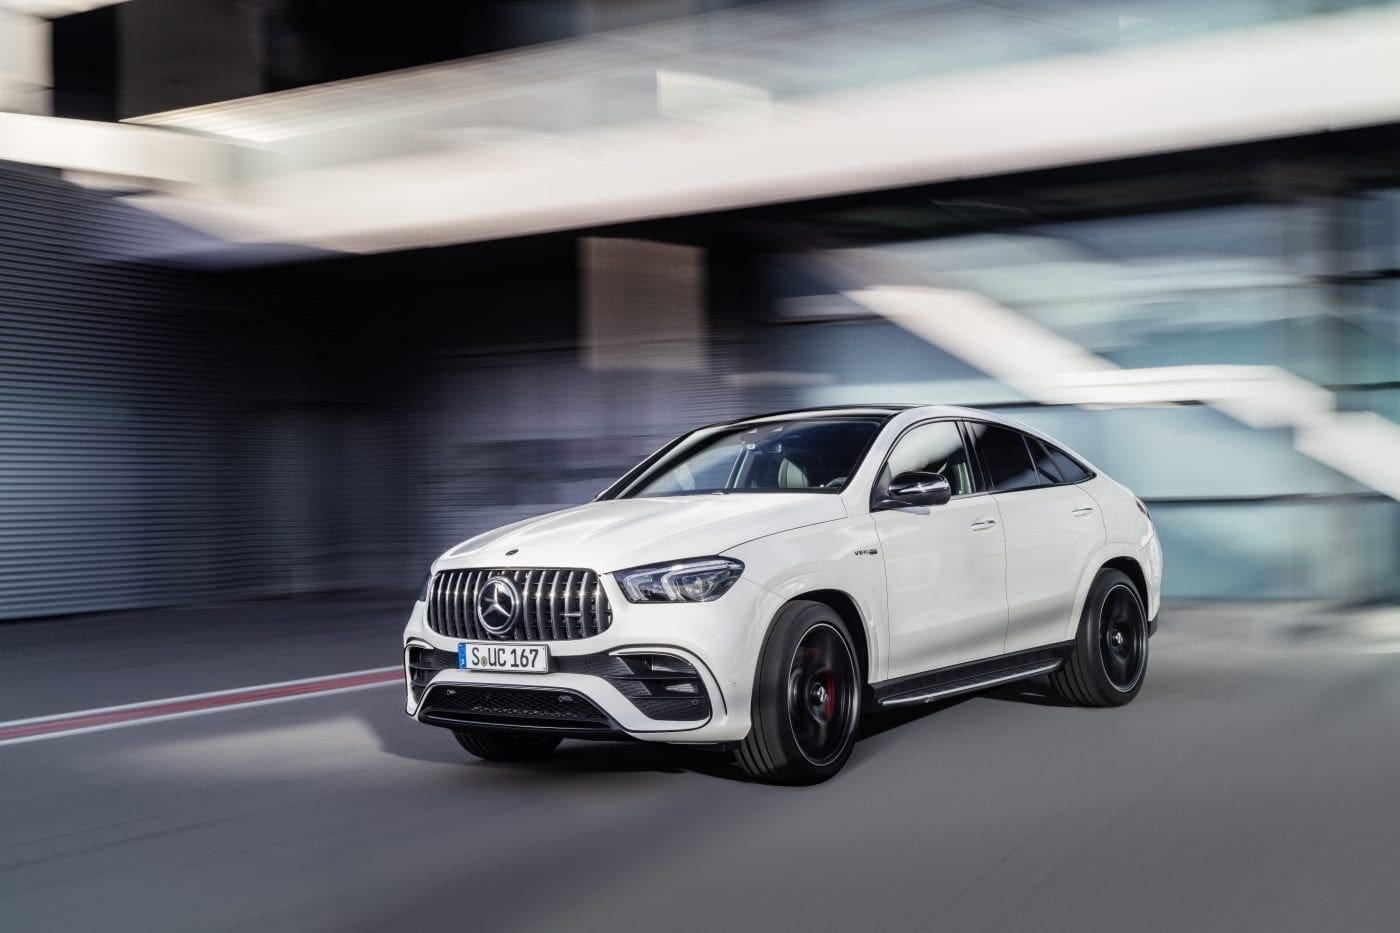 2021 Mercedes-AMG GLE 63 S Coupe Revealed With More Power